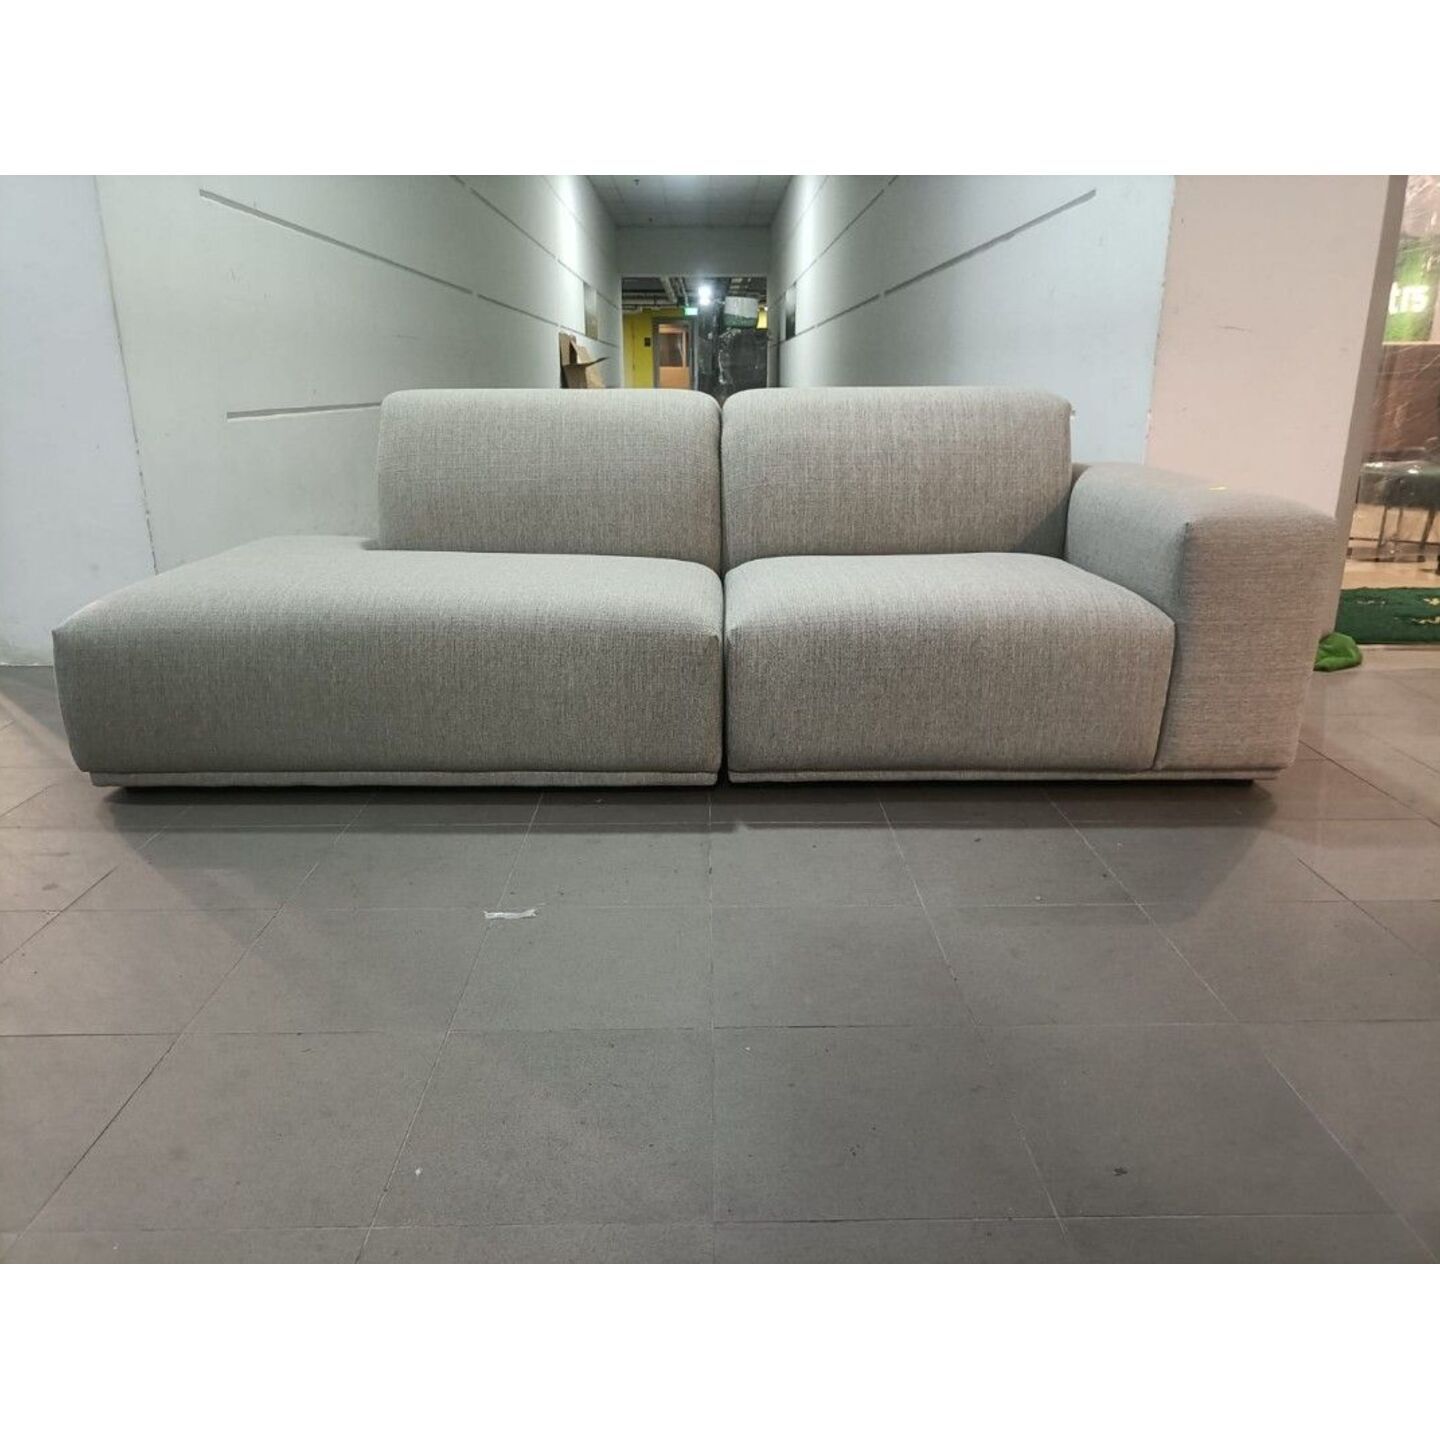 HYEKYO Side Chaise Sofa in LIGHT GREY FABRIC